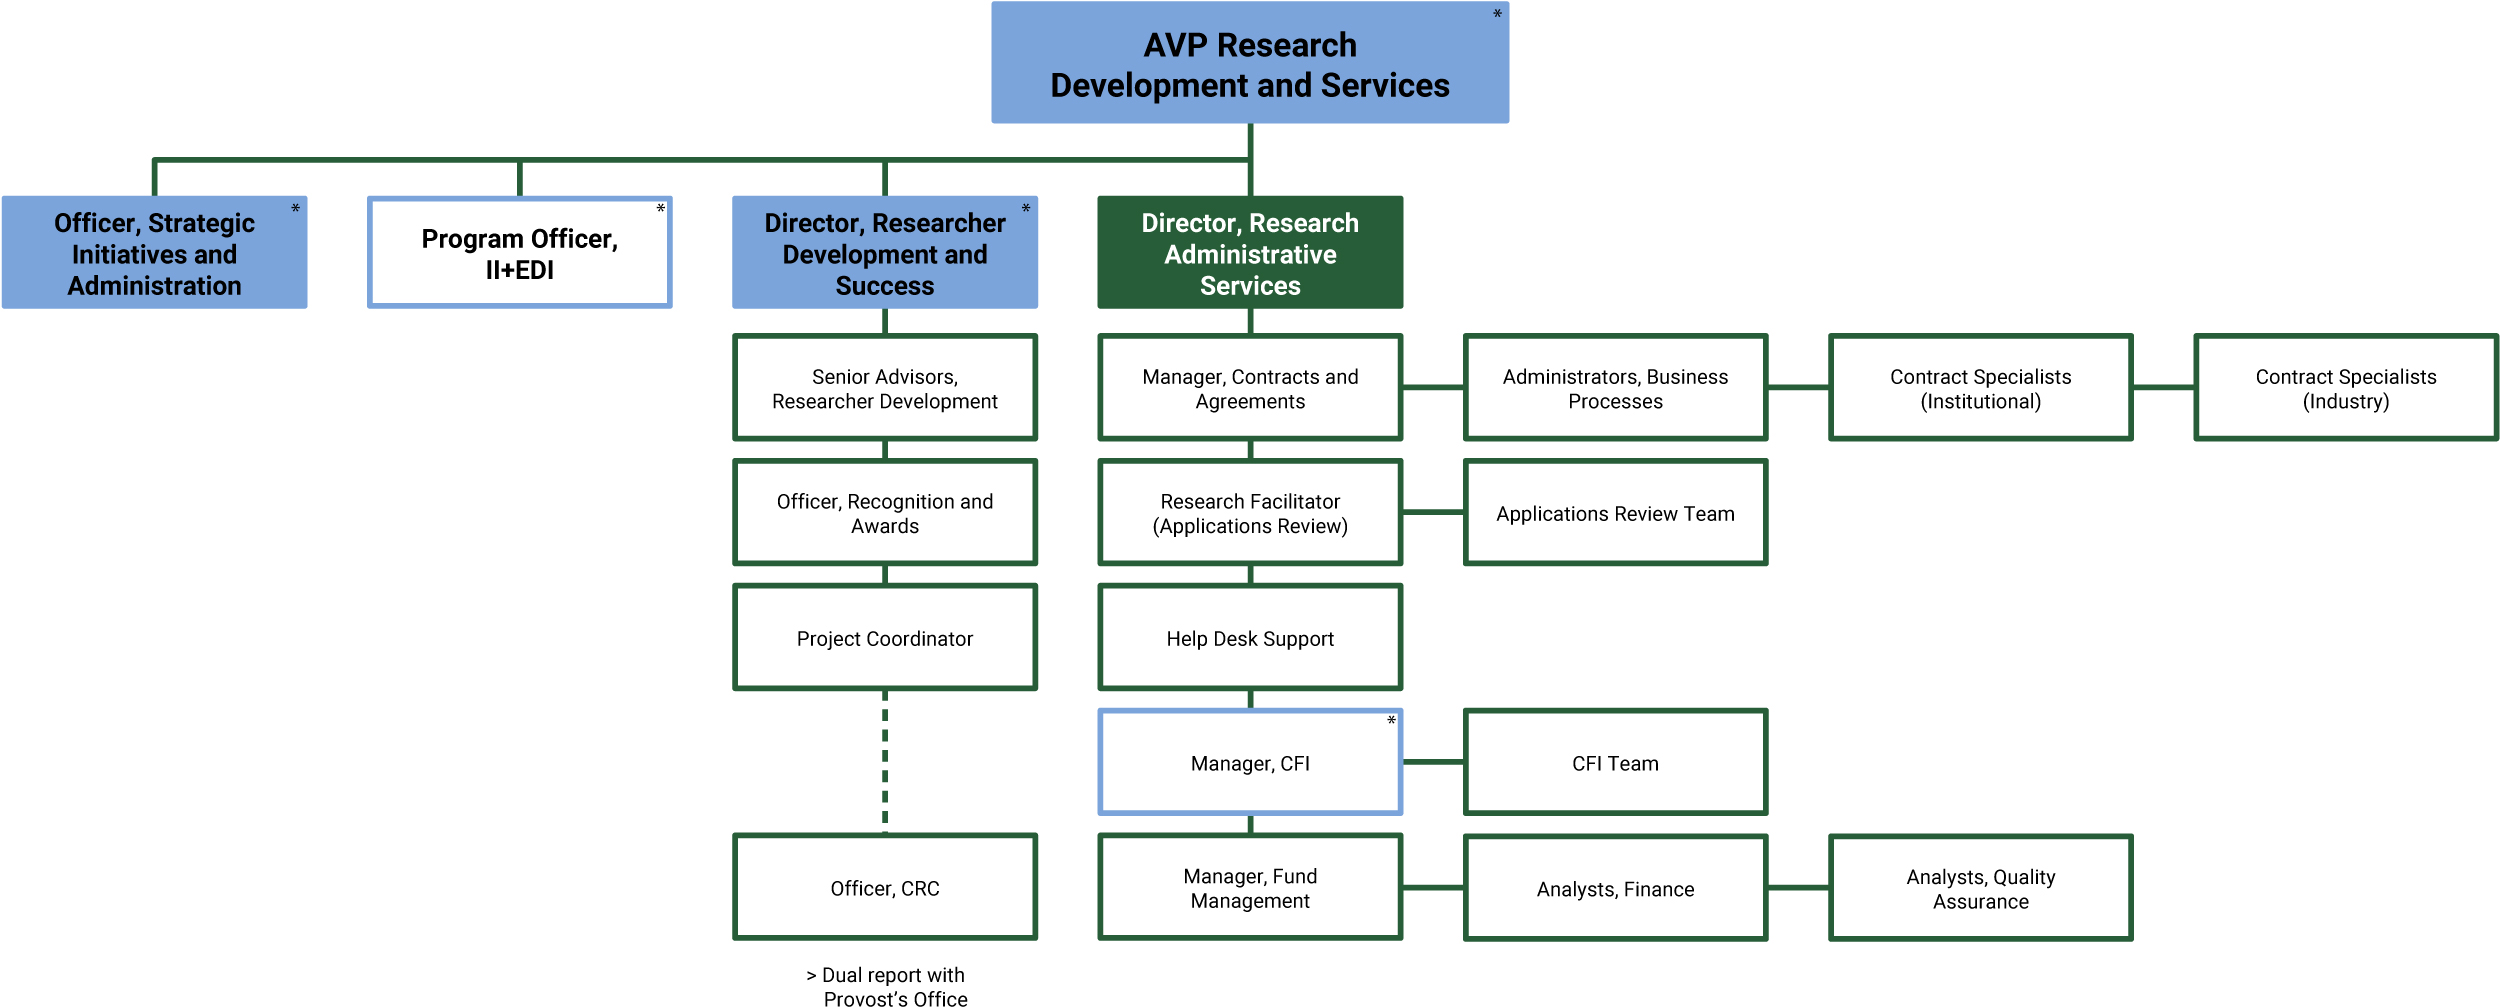 Organizational chart representing AVP Research Development and Services